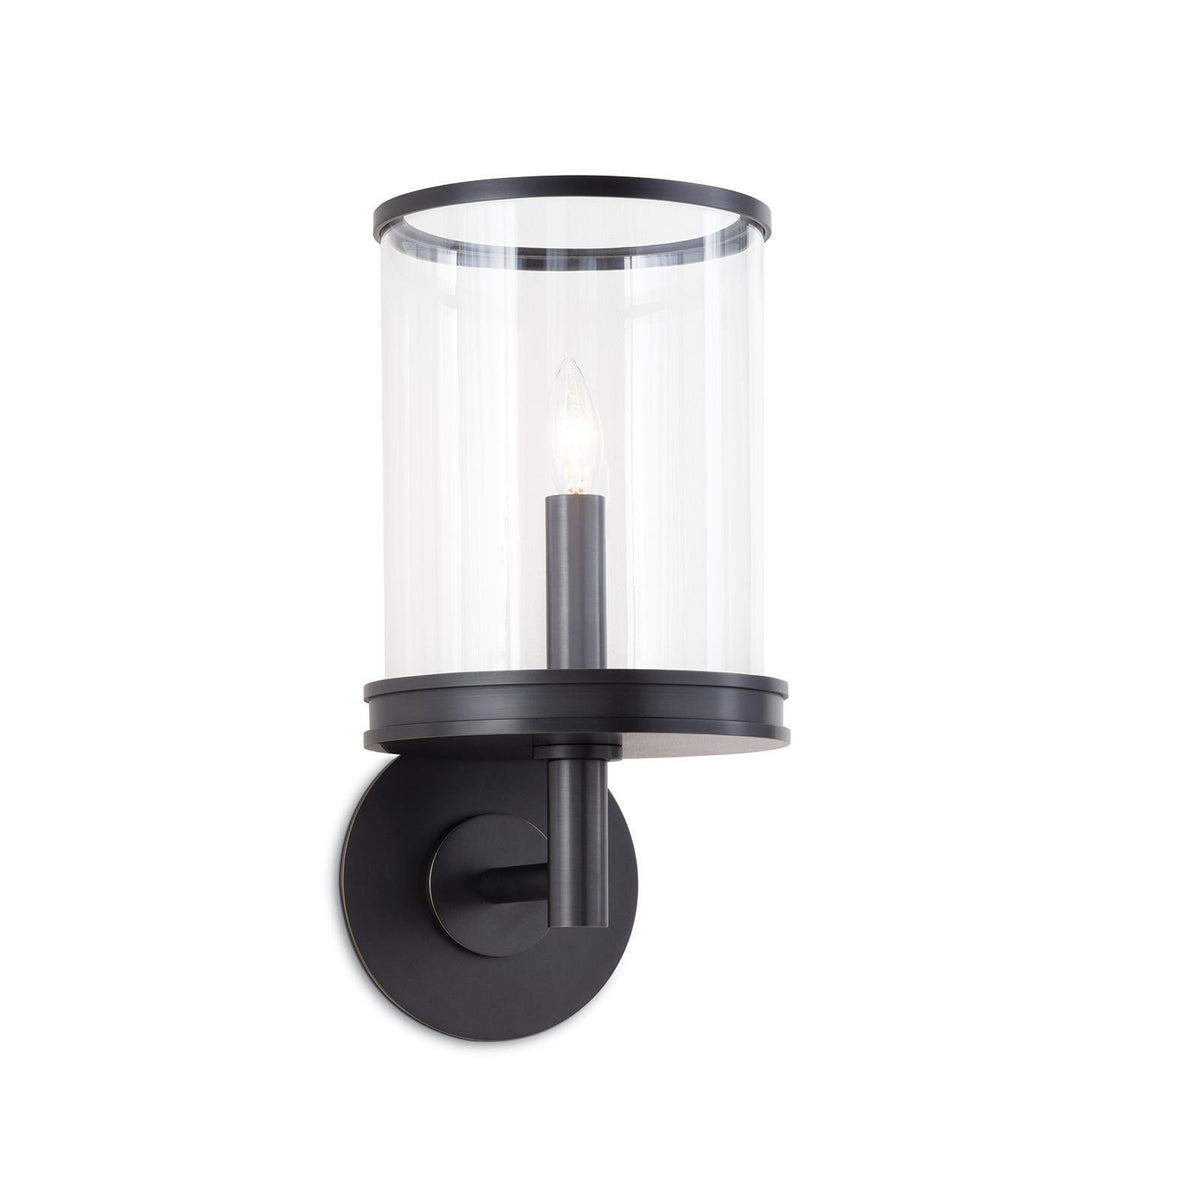 Regina Andrew - Southern Living Adria Wall Sconce - 15-1207ORB | Montreal Lighting & Hardware